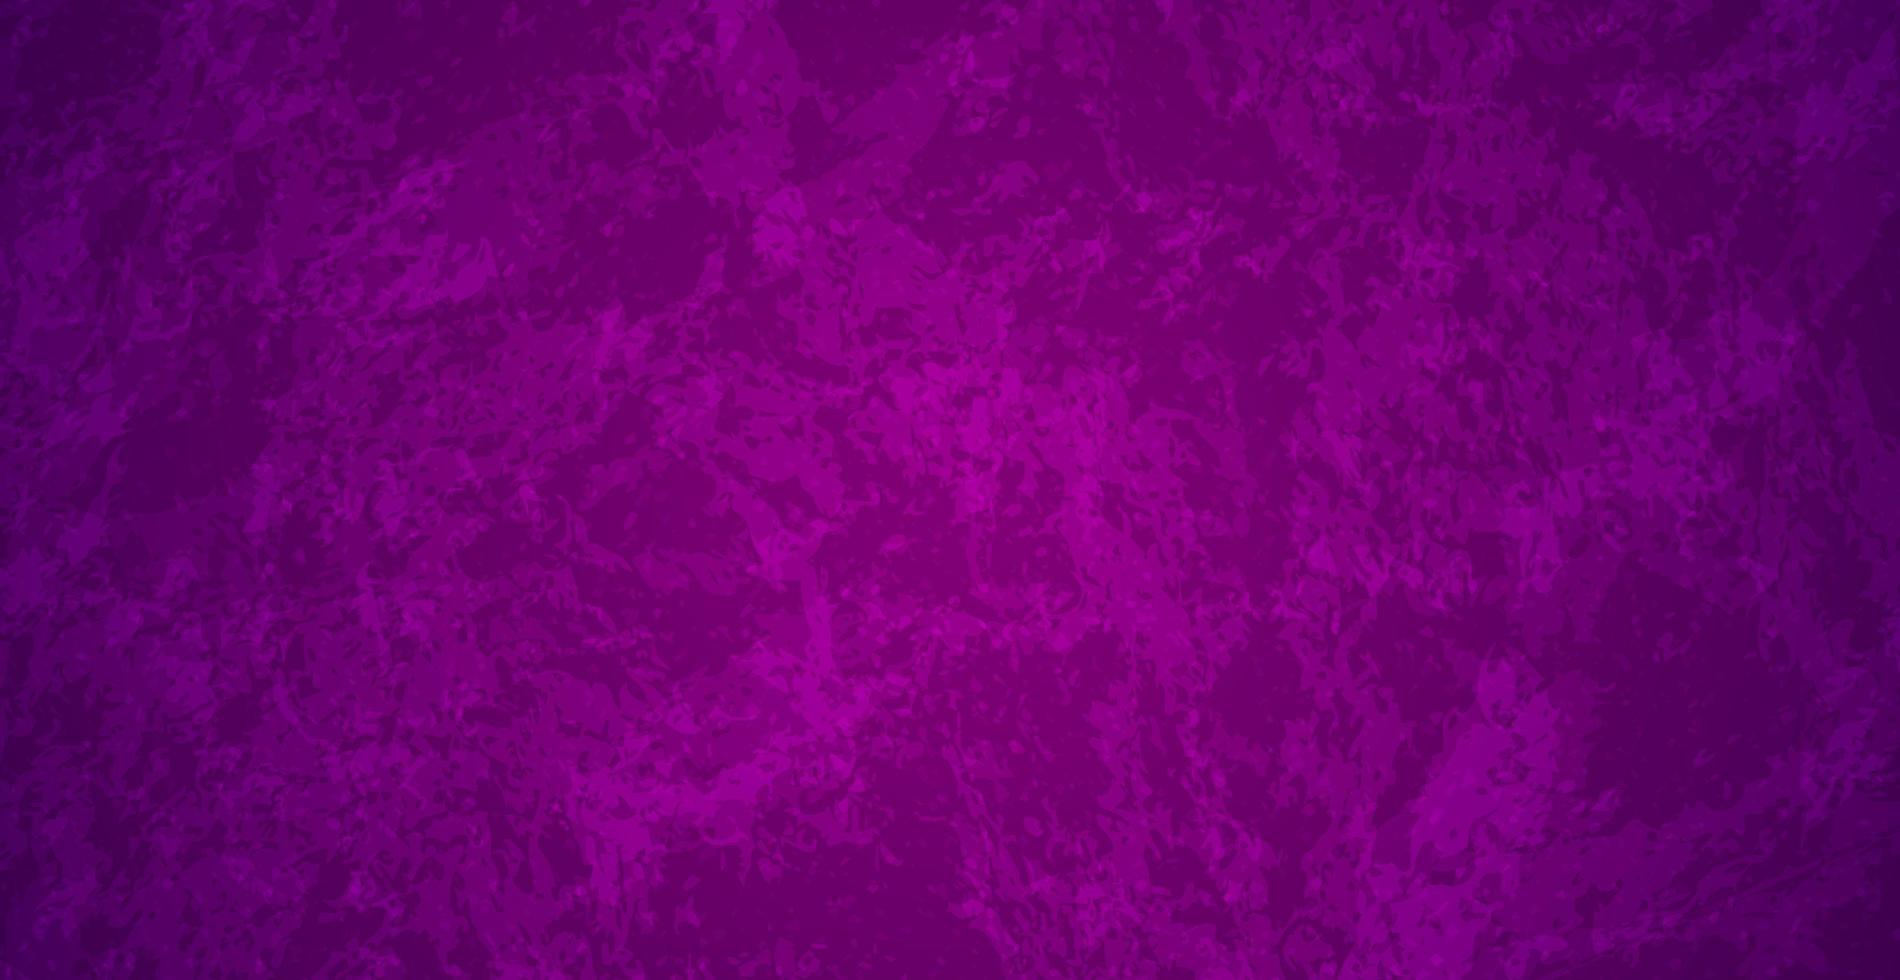 Abstract purple textured grunge web background - Vector